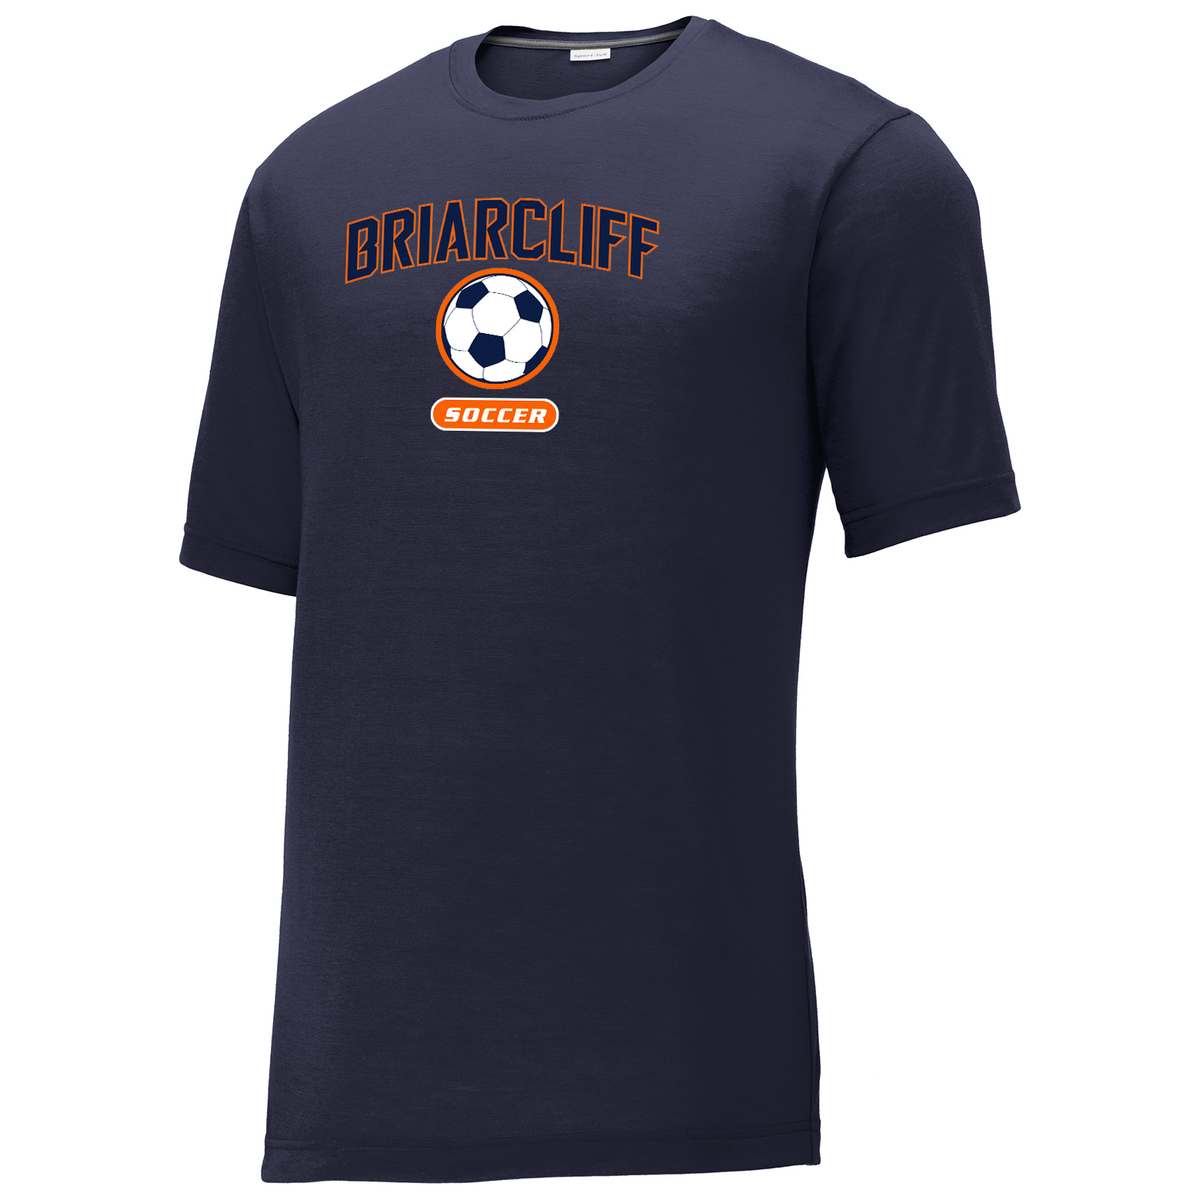 Briarcliff Soccer CottonTouch Performance T-Shirt